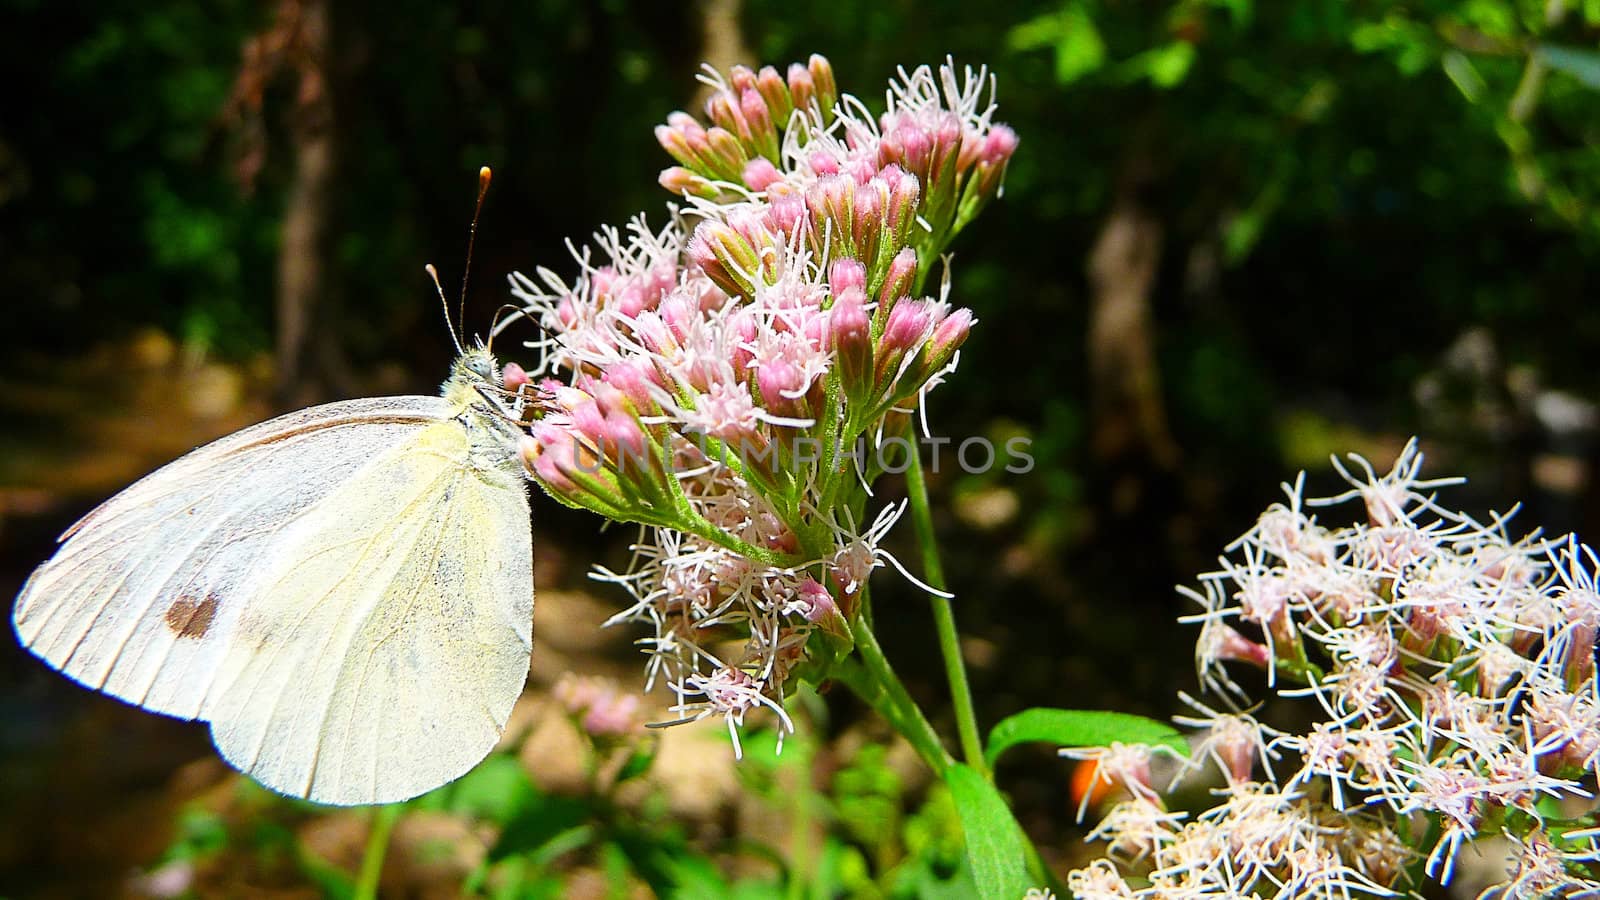 A white butterfly sits on a flower